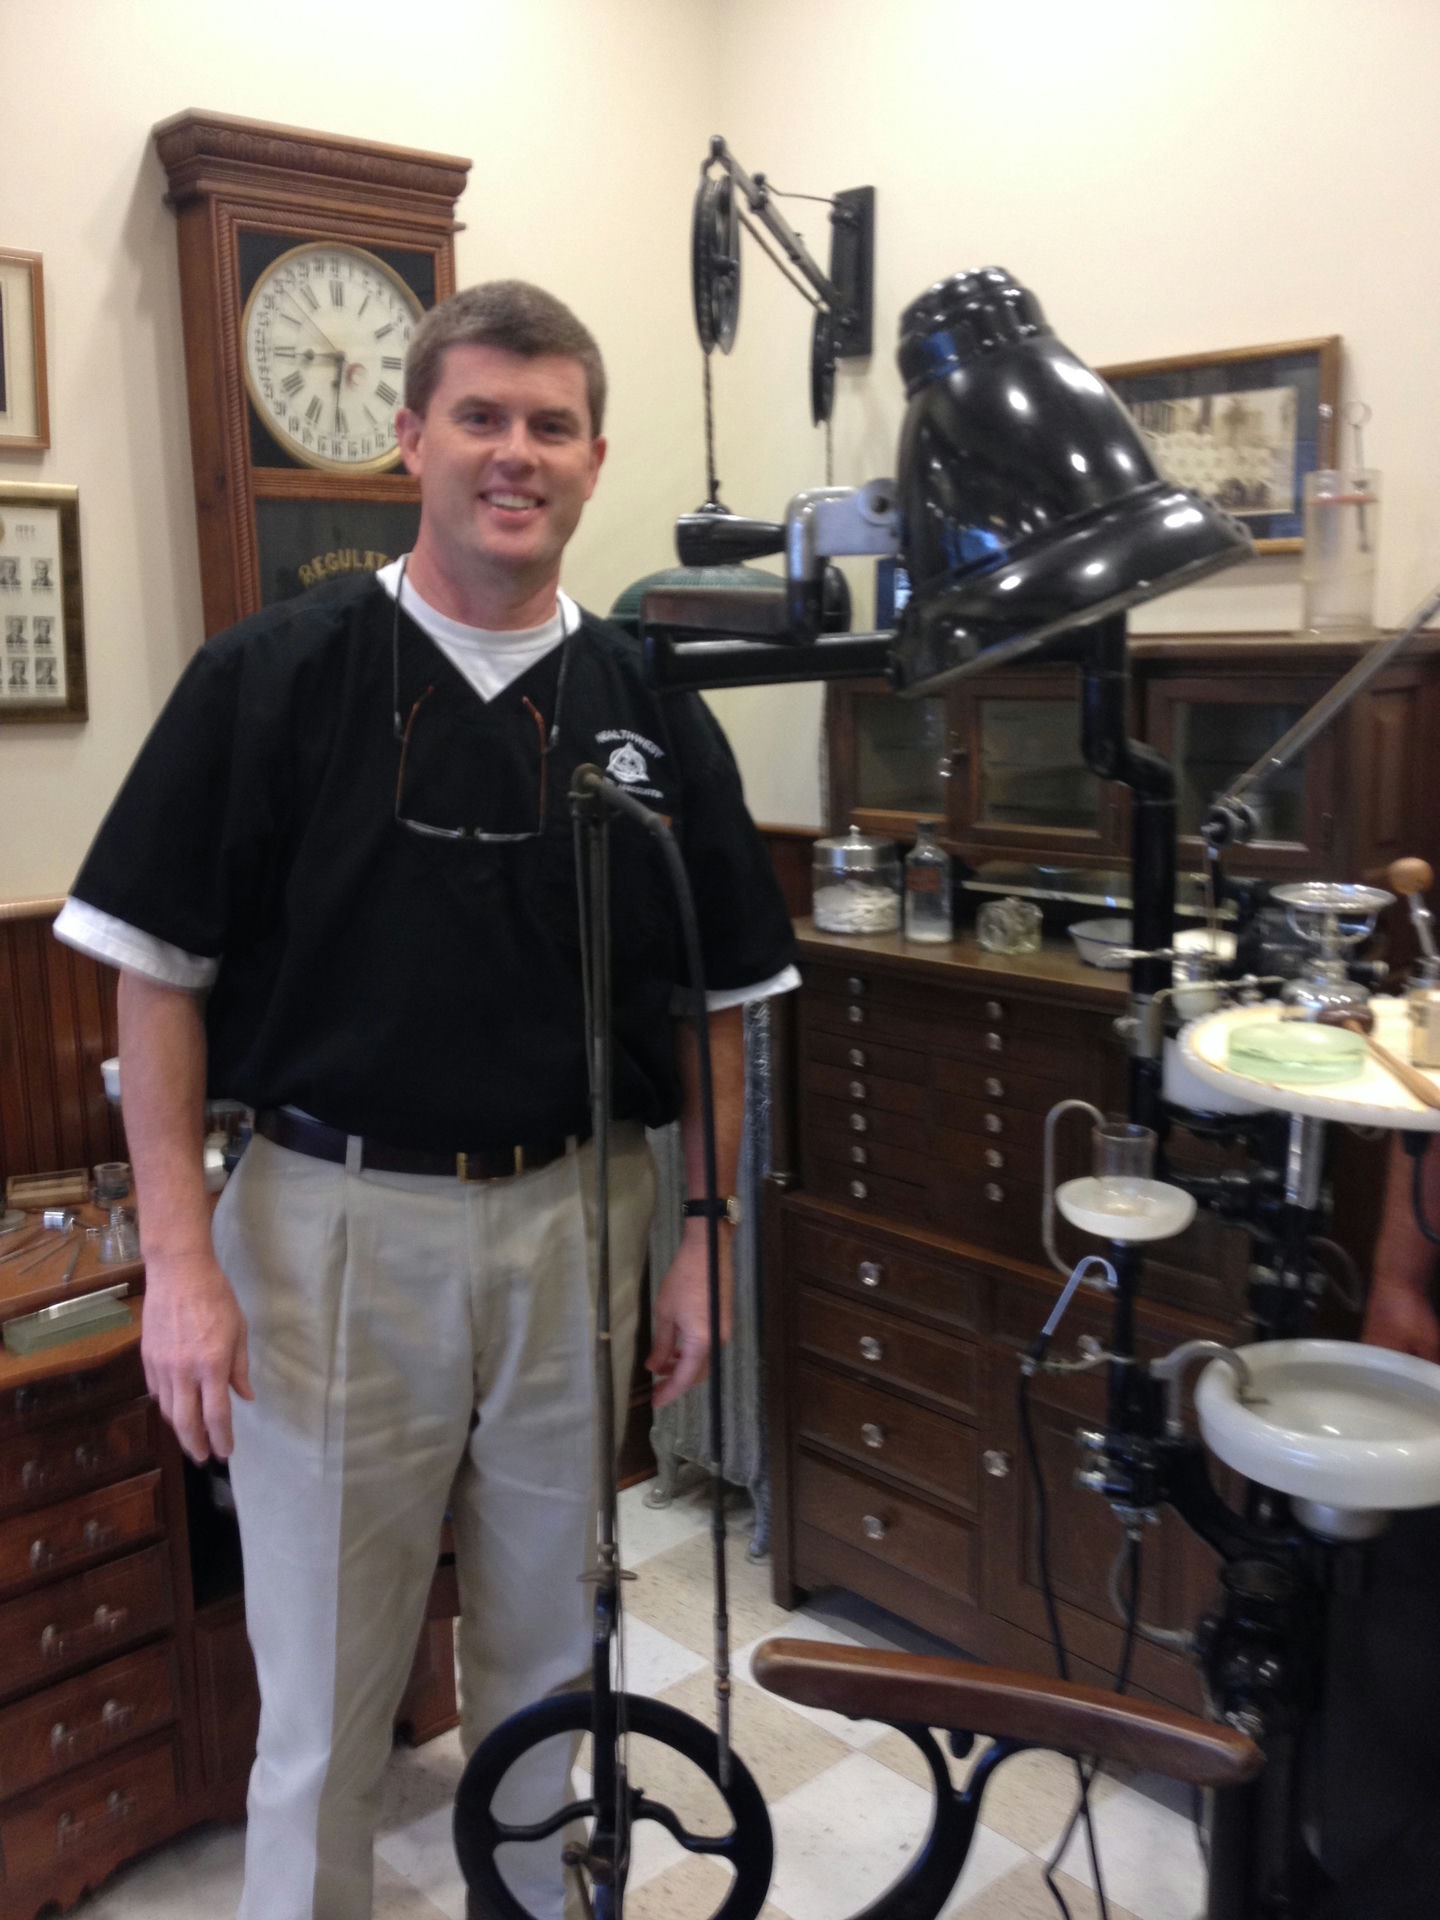 Third-generation Alabama dentist, Dr. H. Paul Hufham III, with his grandfather’s dental equipment, on display for all of his patients in Dothan.